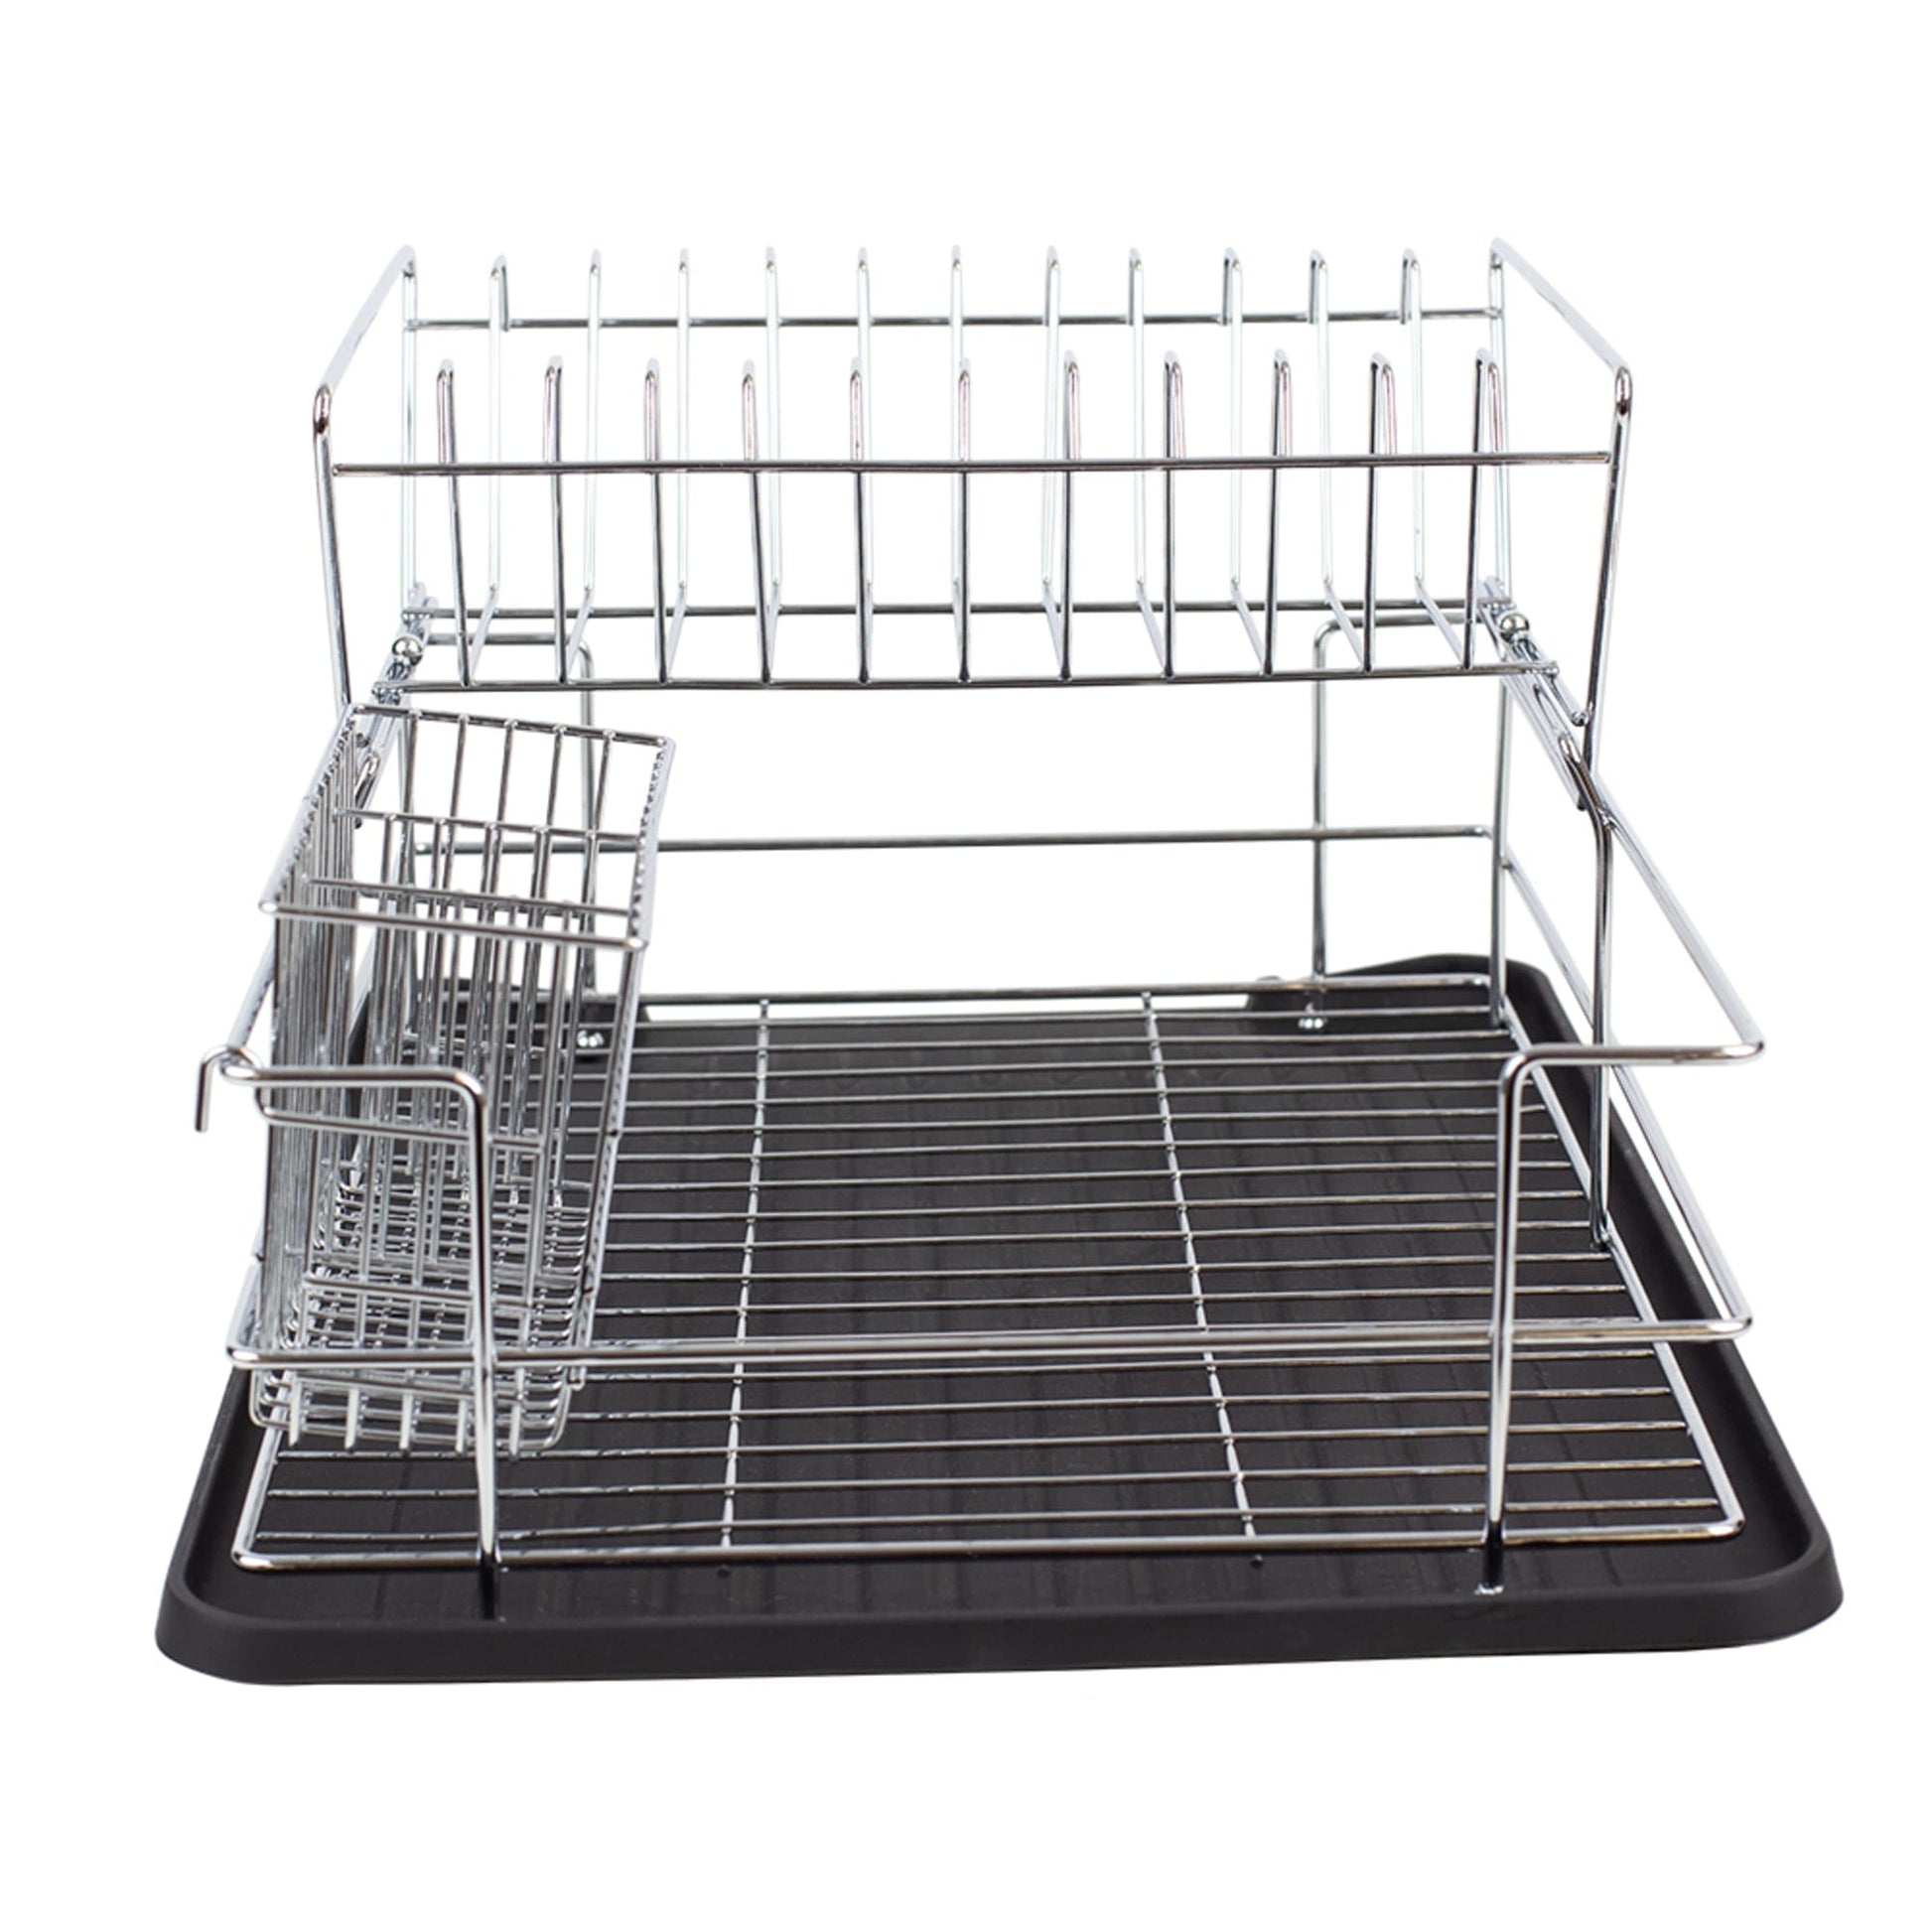 Modern Kitchen Deluxe 2 Tier Chrome Finished - Black Dish Drying